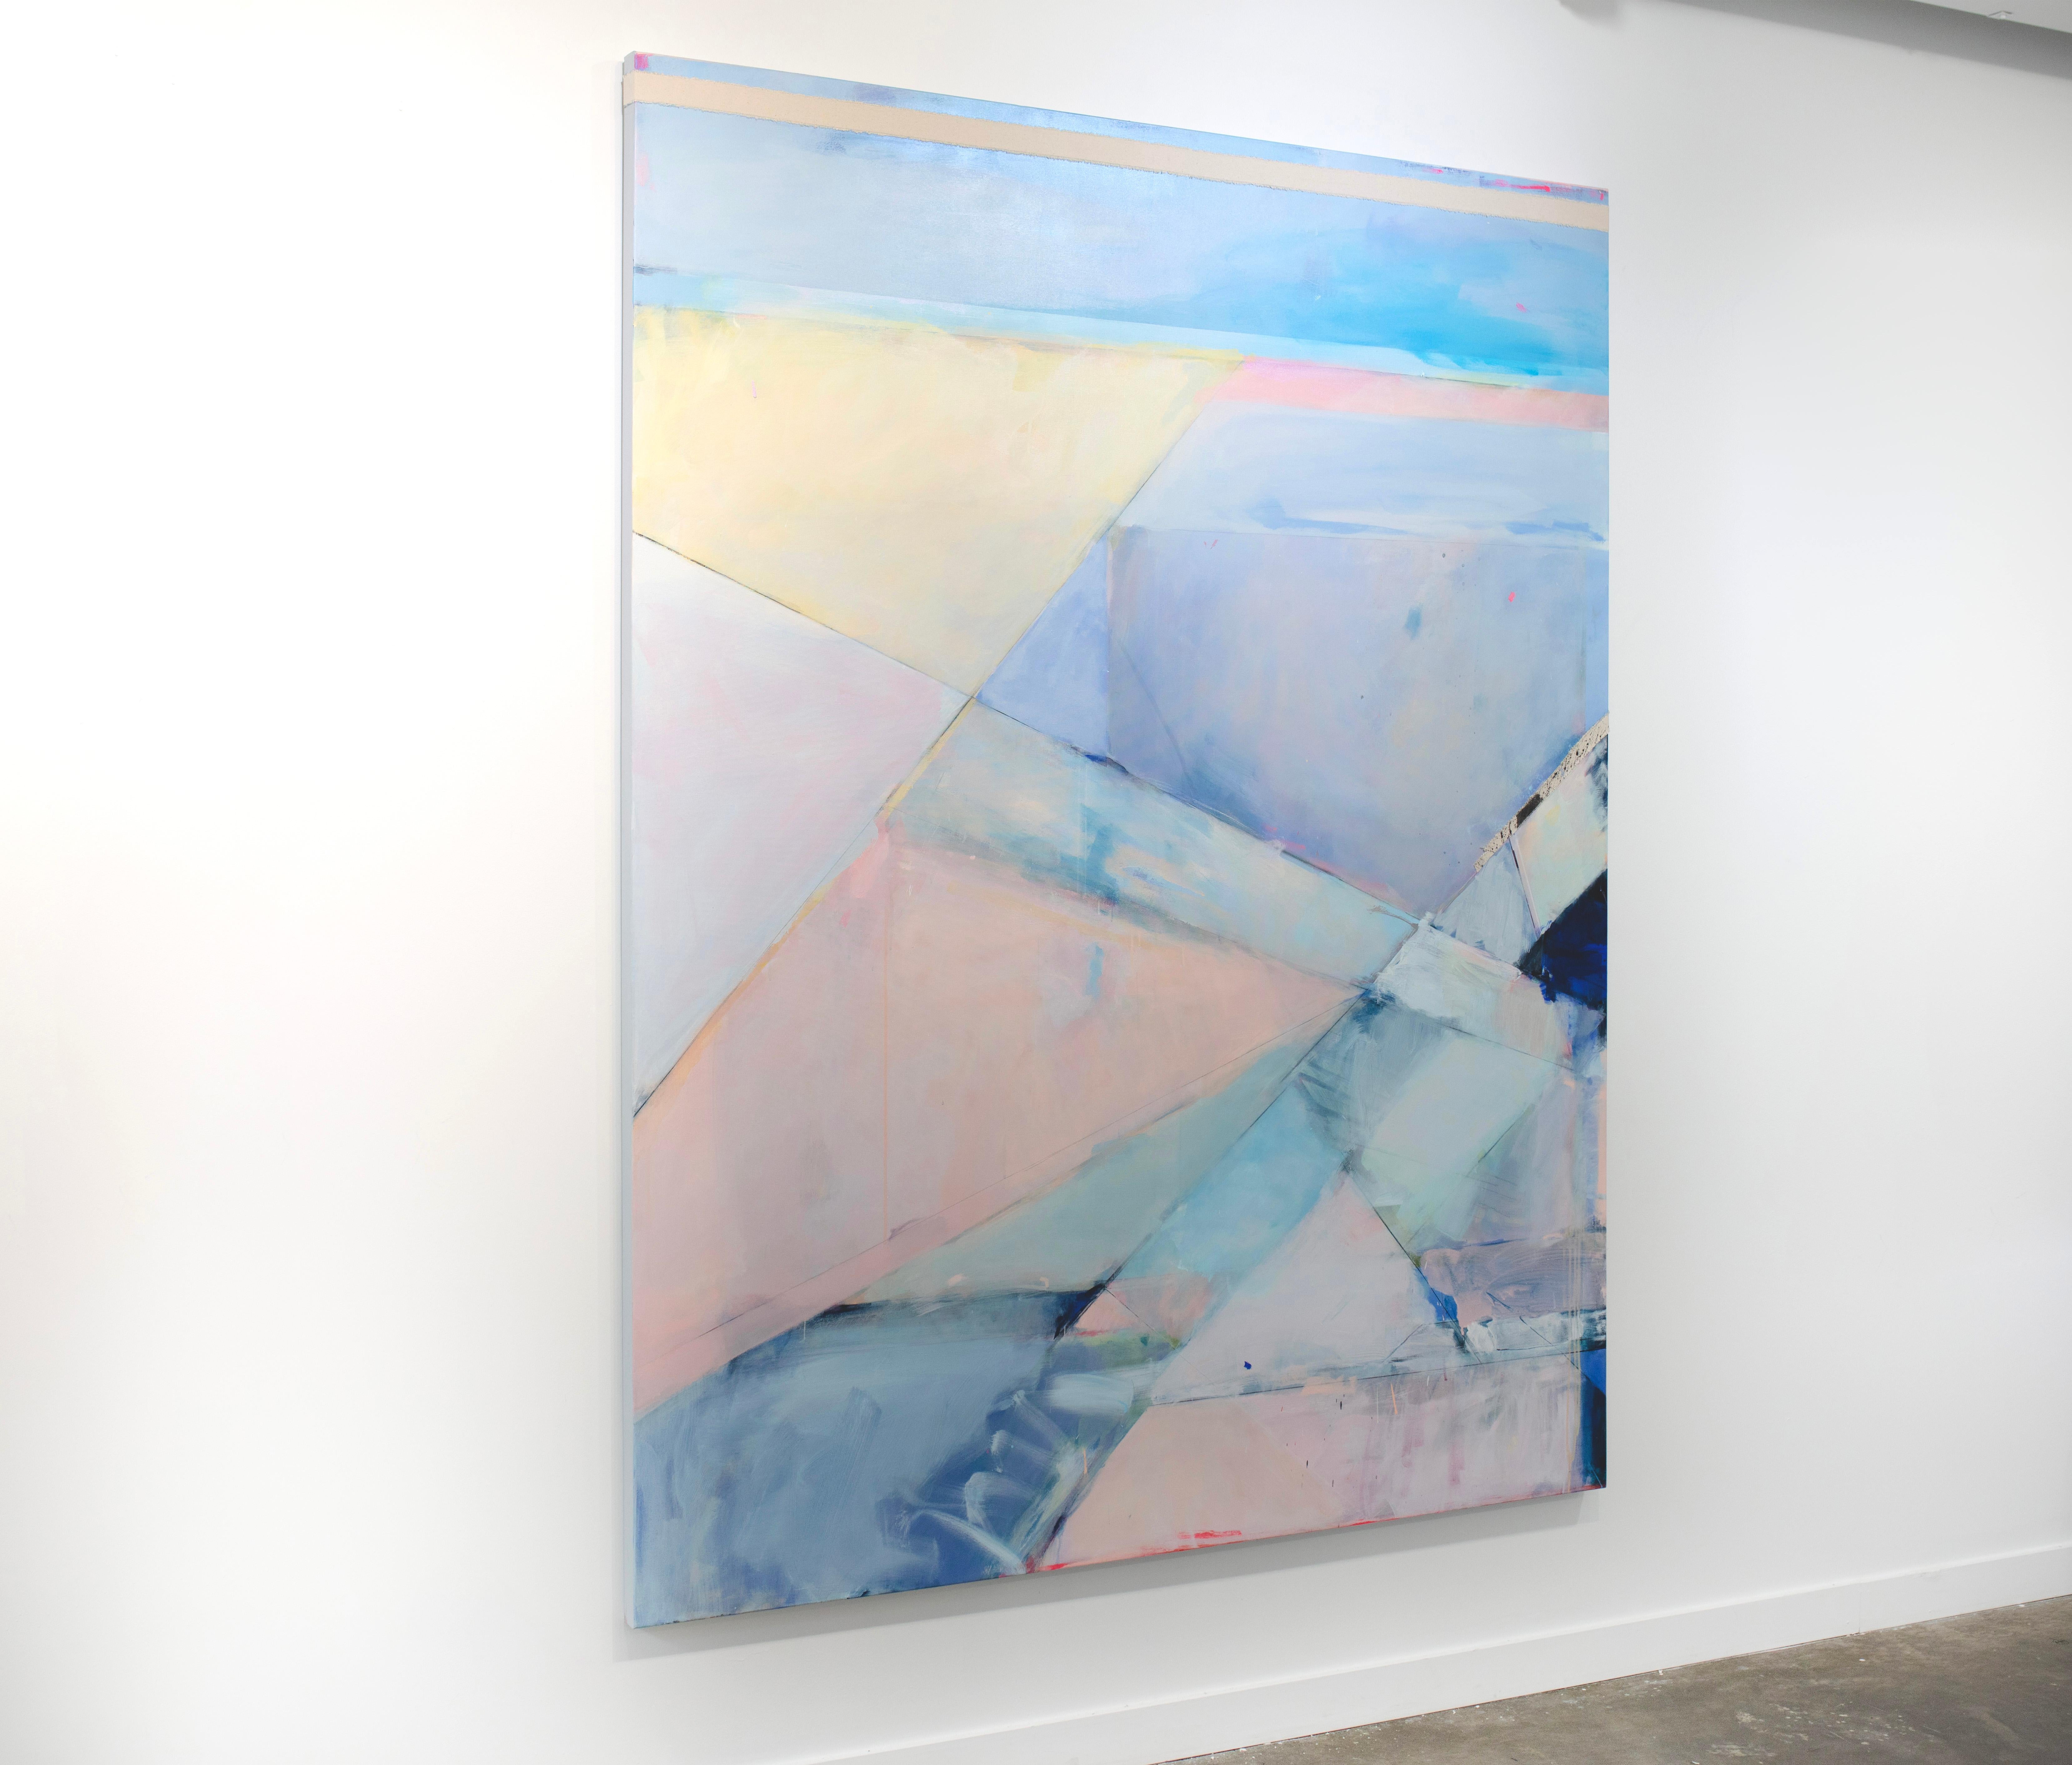 This large abstract statement painting by Kelly Rossetti is made with acrylic paint and raw canvas pieces assembled on gallery wrapped canvas. It features a light pink and blue palette and darker contrasting accents, with geometric horizontal and